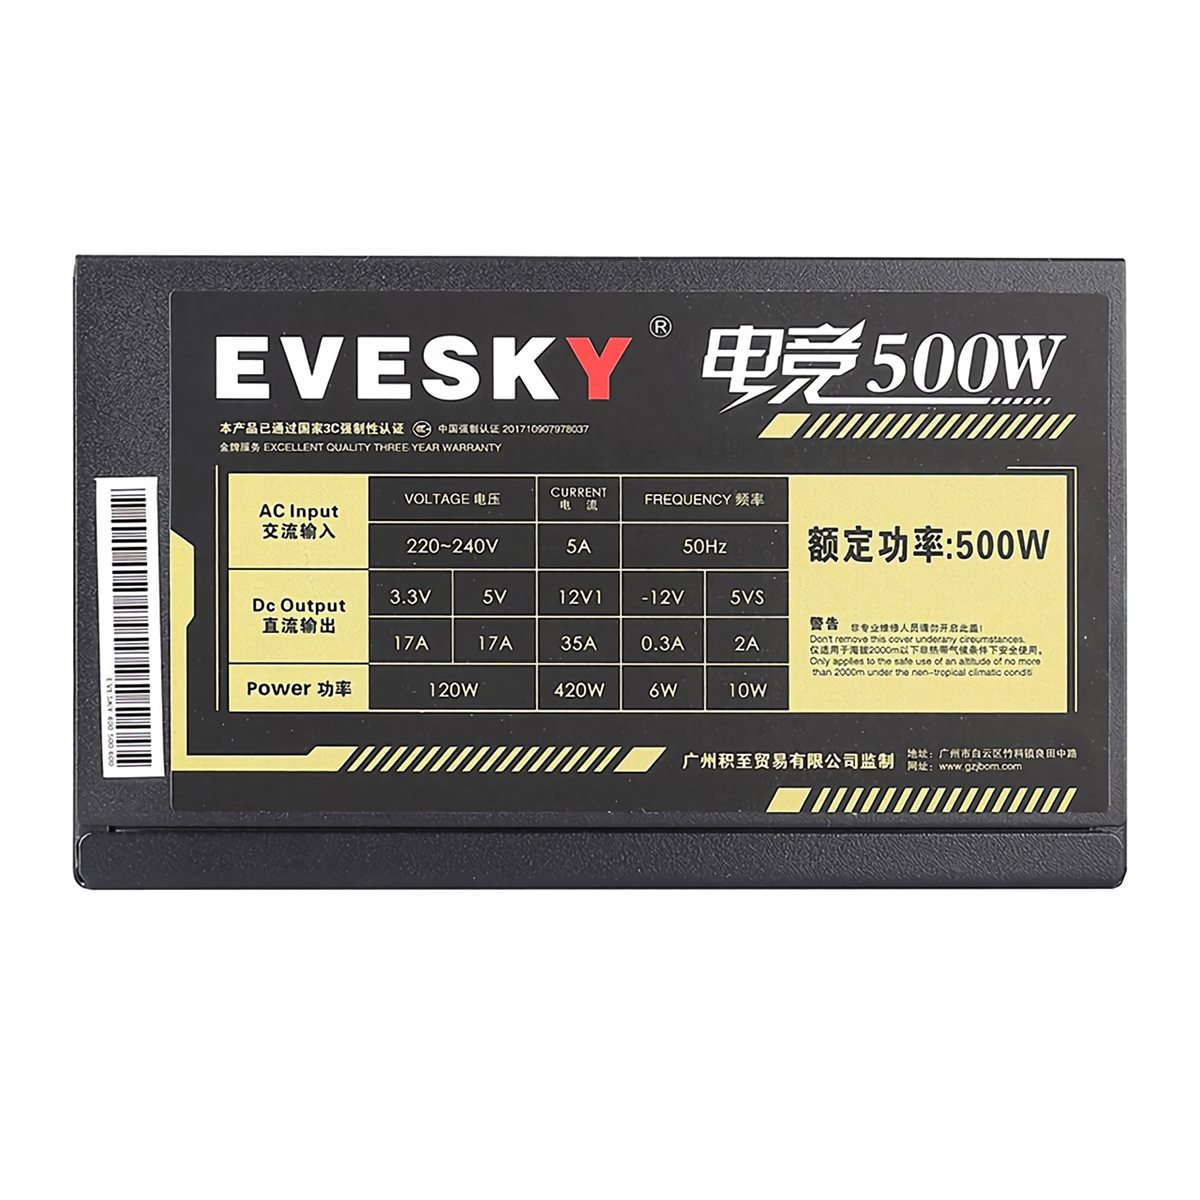 EVESKY-500W-Desktop-Computer-Mainframe-Power-Supply-Wide-Mute-Power-Supply-12CM-Rated-500W-Peak-Non--1841201-10